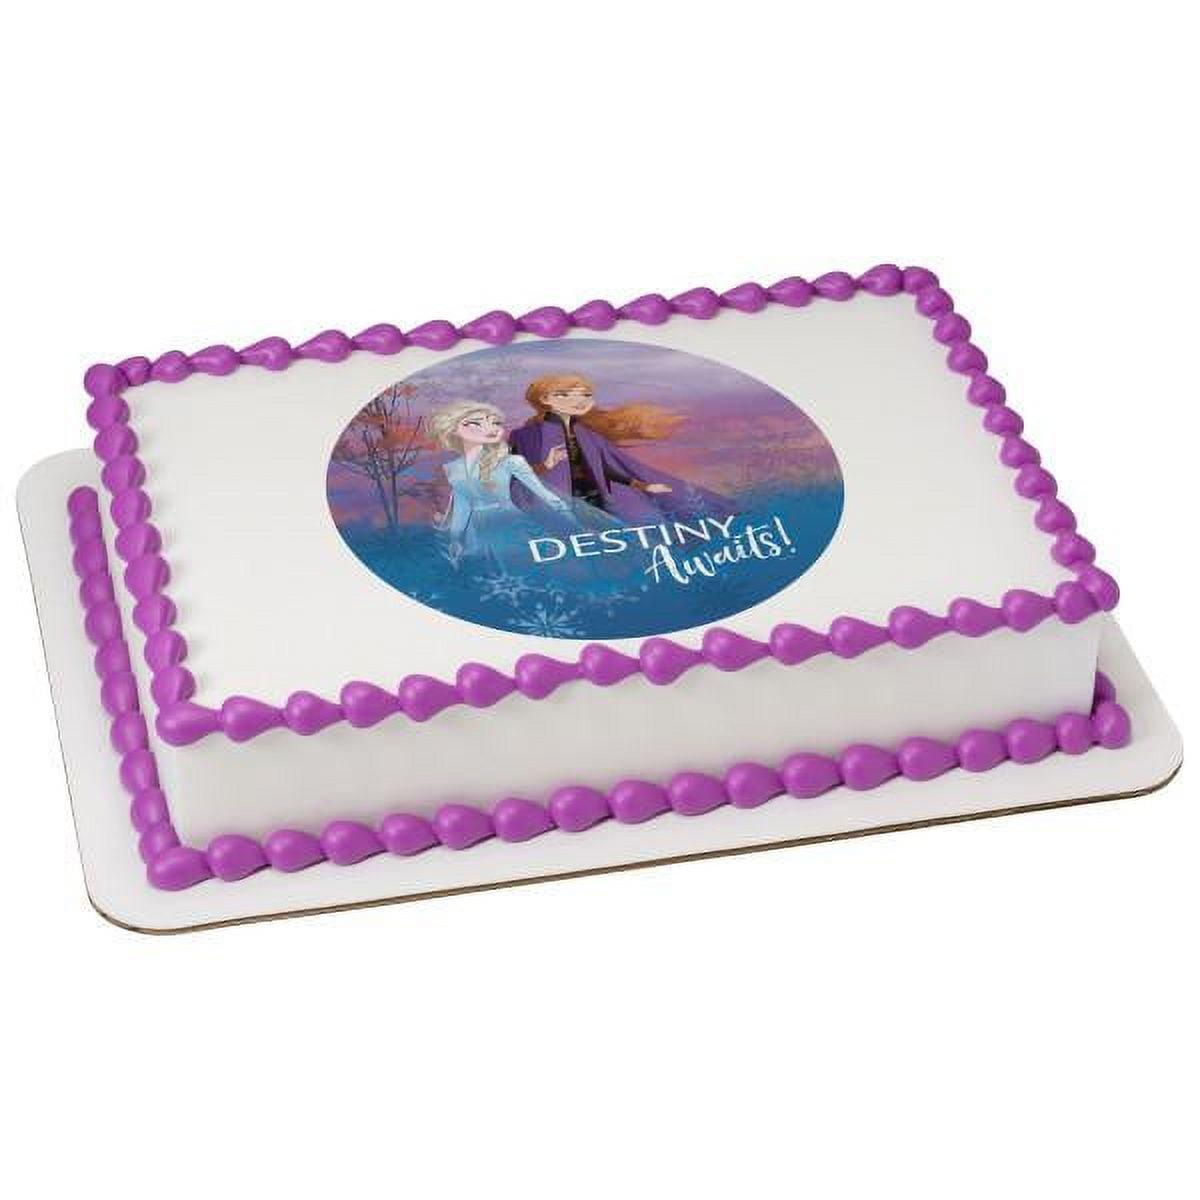 Albums Girls Birthday Cakes + Character Cakes | Cake World - Delicious Cakes  for Every Occasion.